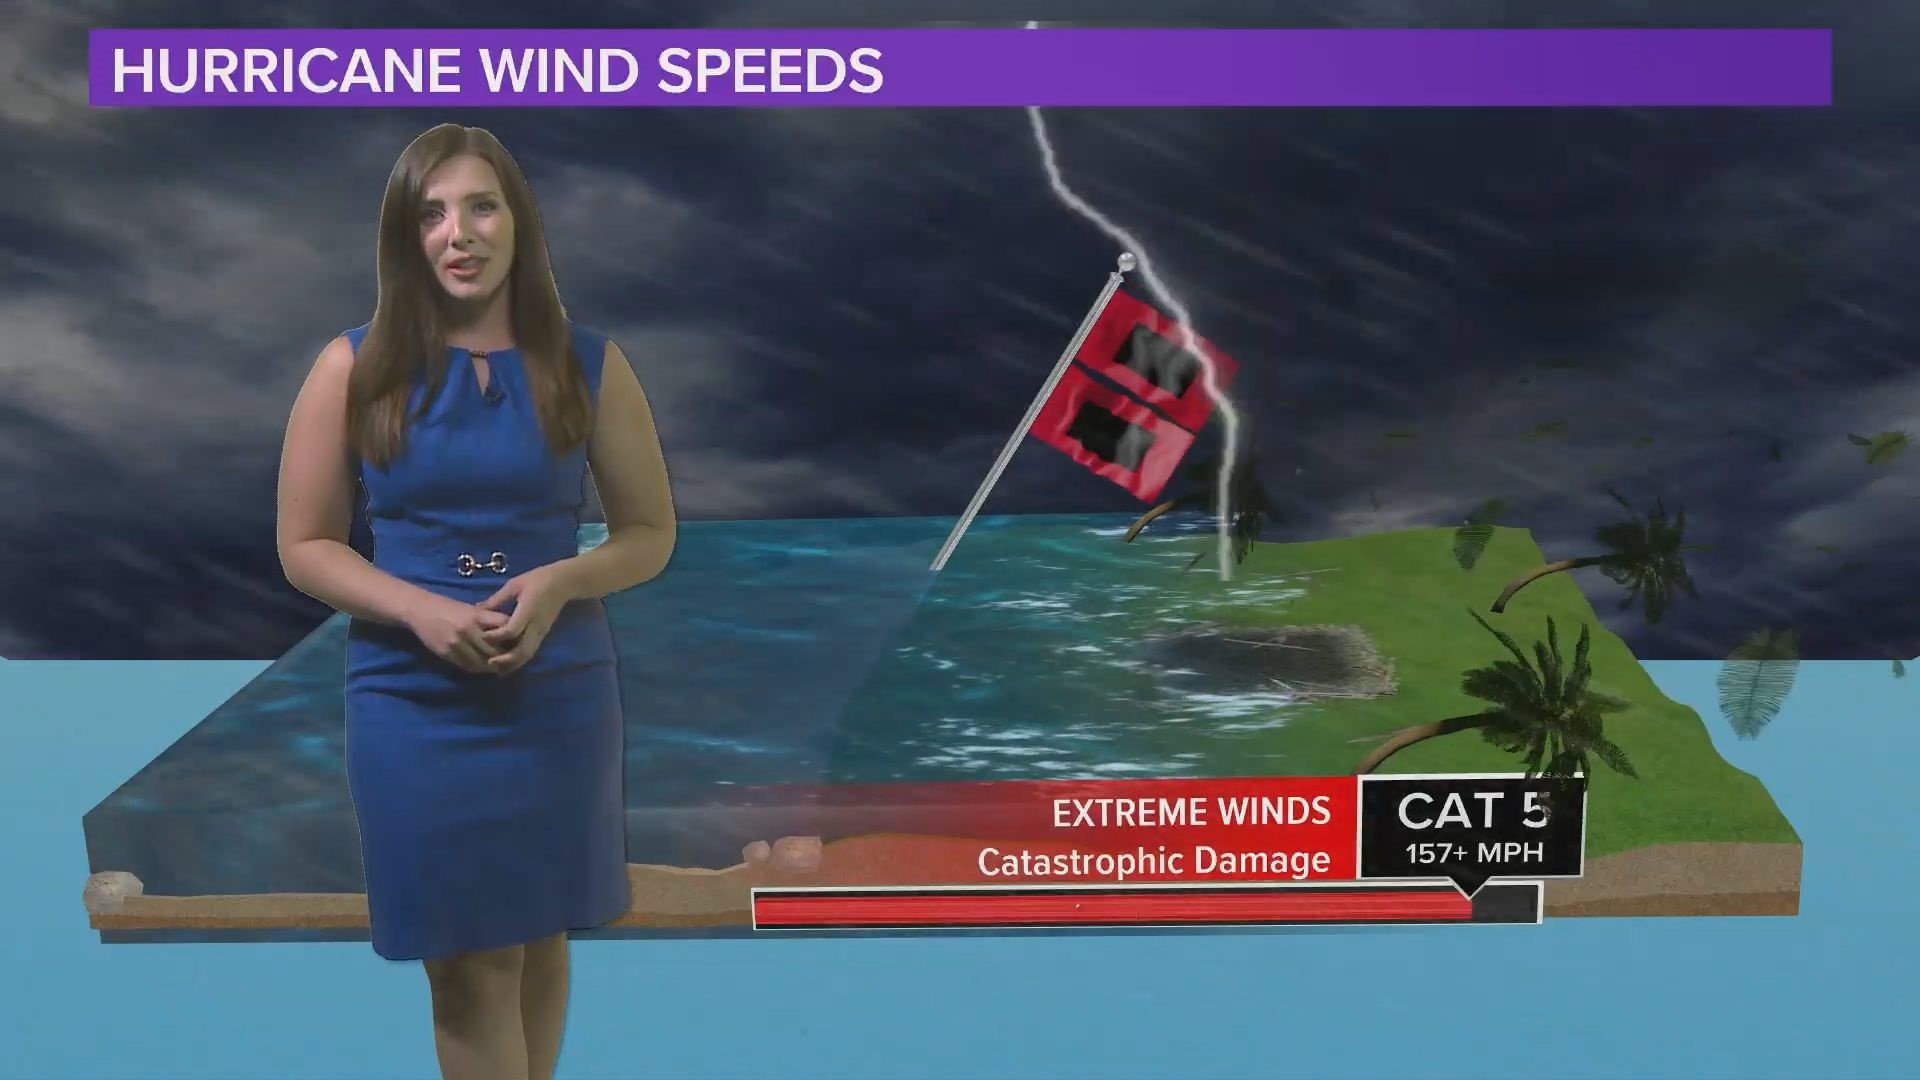 With any hurricane, you'll see different hurricane categories, such as Categore 2 or Category 3. But what do those mean? Meteorologist Danielle Miller explains the Saffir-Simpson scale for hurricanes.